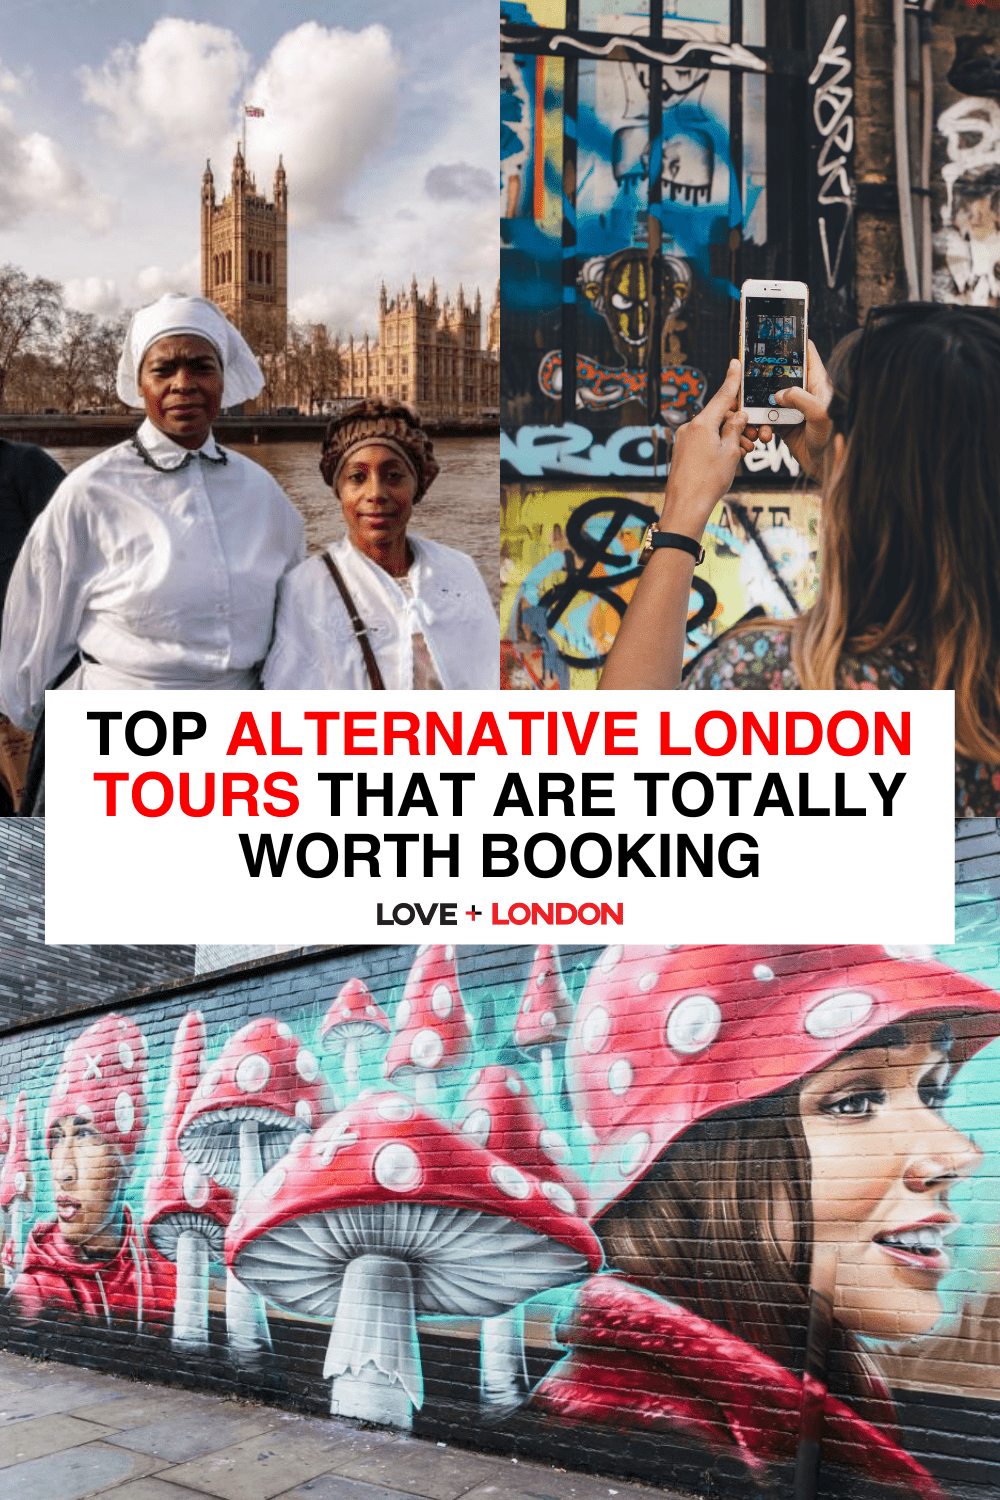 Top Alternative London Tours that are Totally Worth Booking